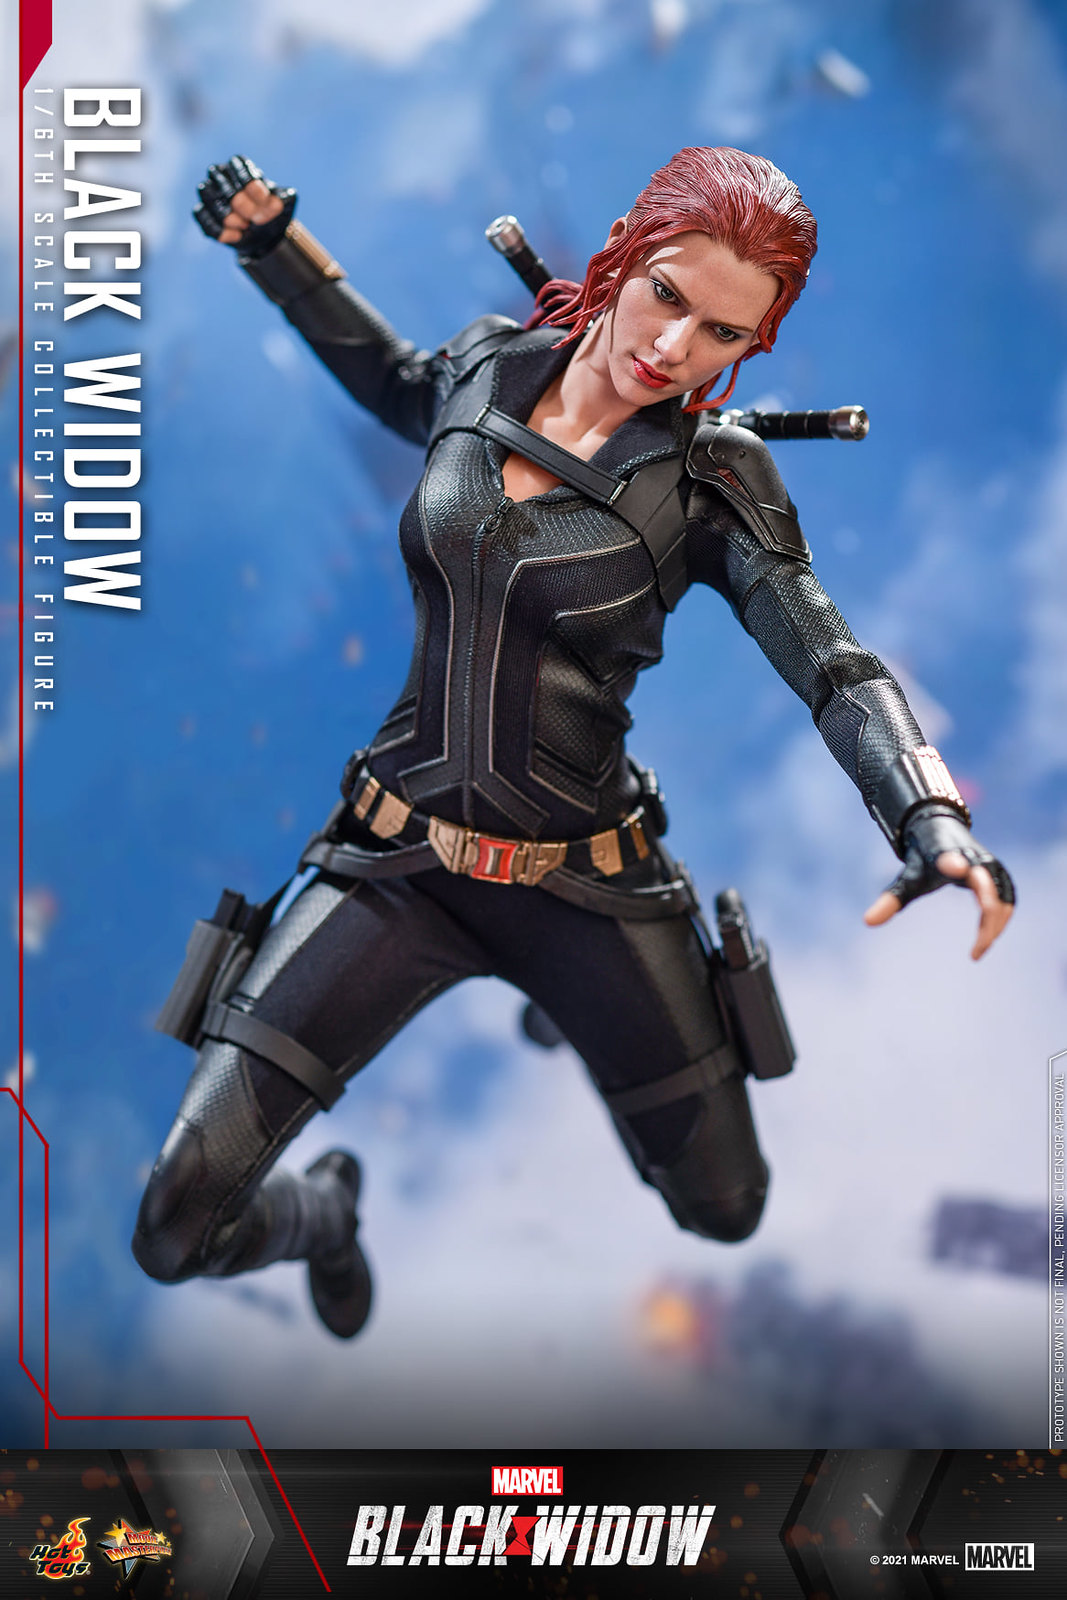 NEW PRODUCT: Hot Toys Black Widow - 1/6th scale Black Widow Collectible Figure 51312279155_75a3c6d722_h